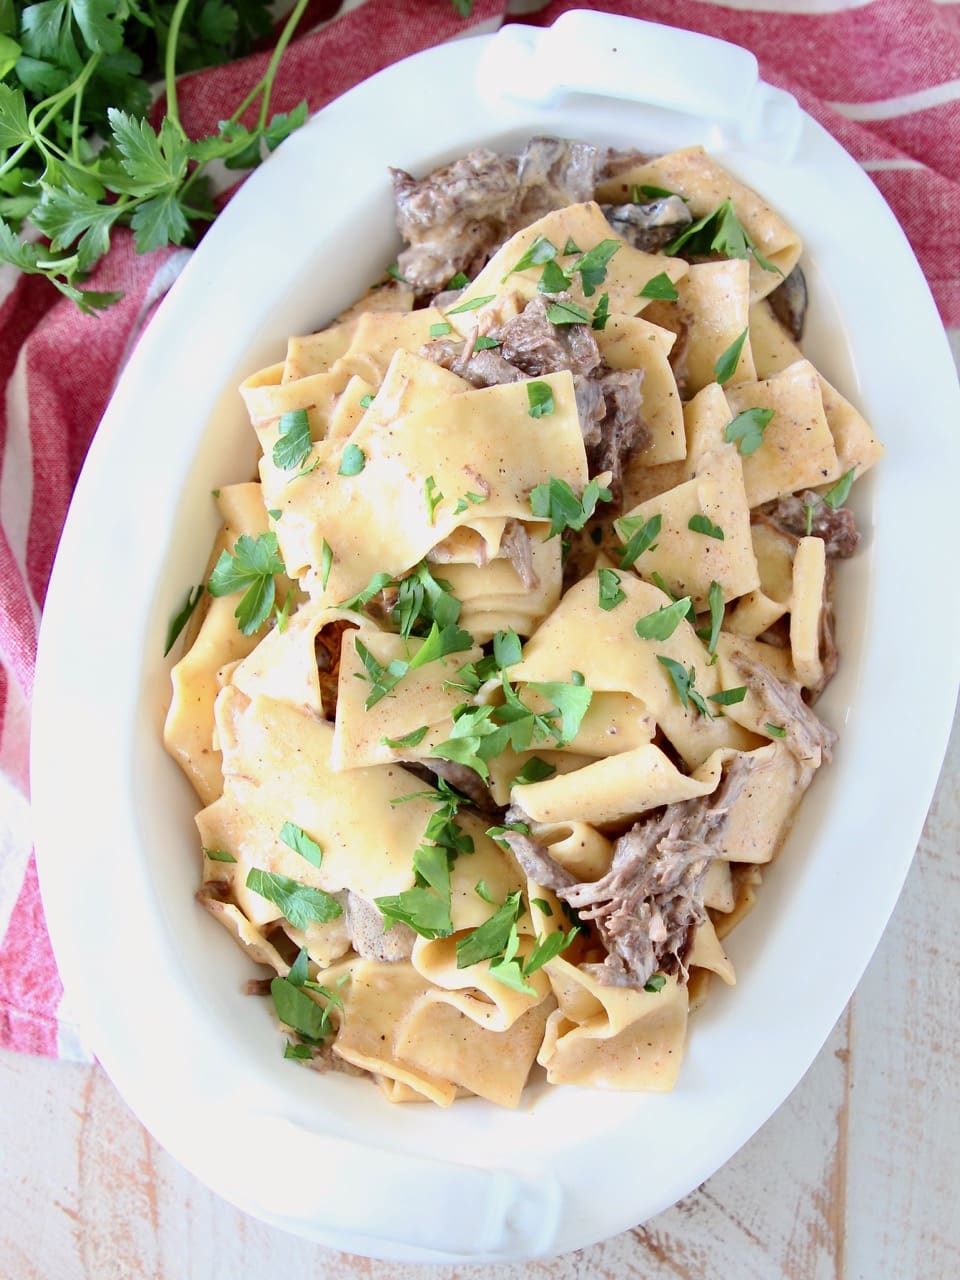 Instant pot beef stroganoff in a large white oval serving dish with wide egg noodles and shredded beef, topped with fresh parsley, sitting on a red and white striped towel